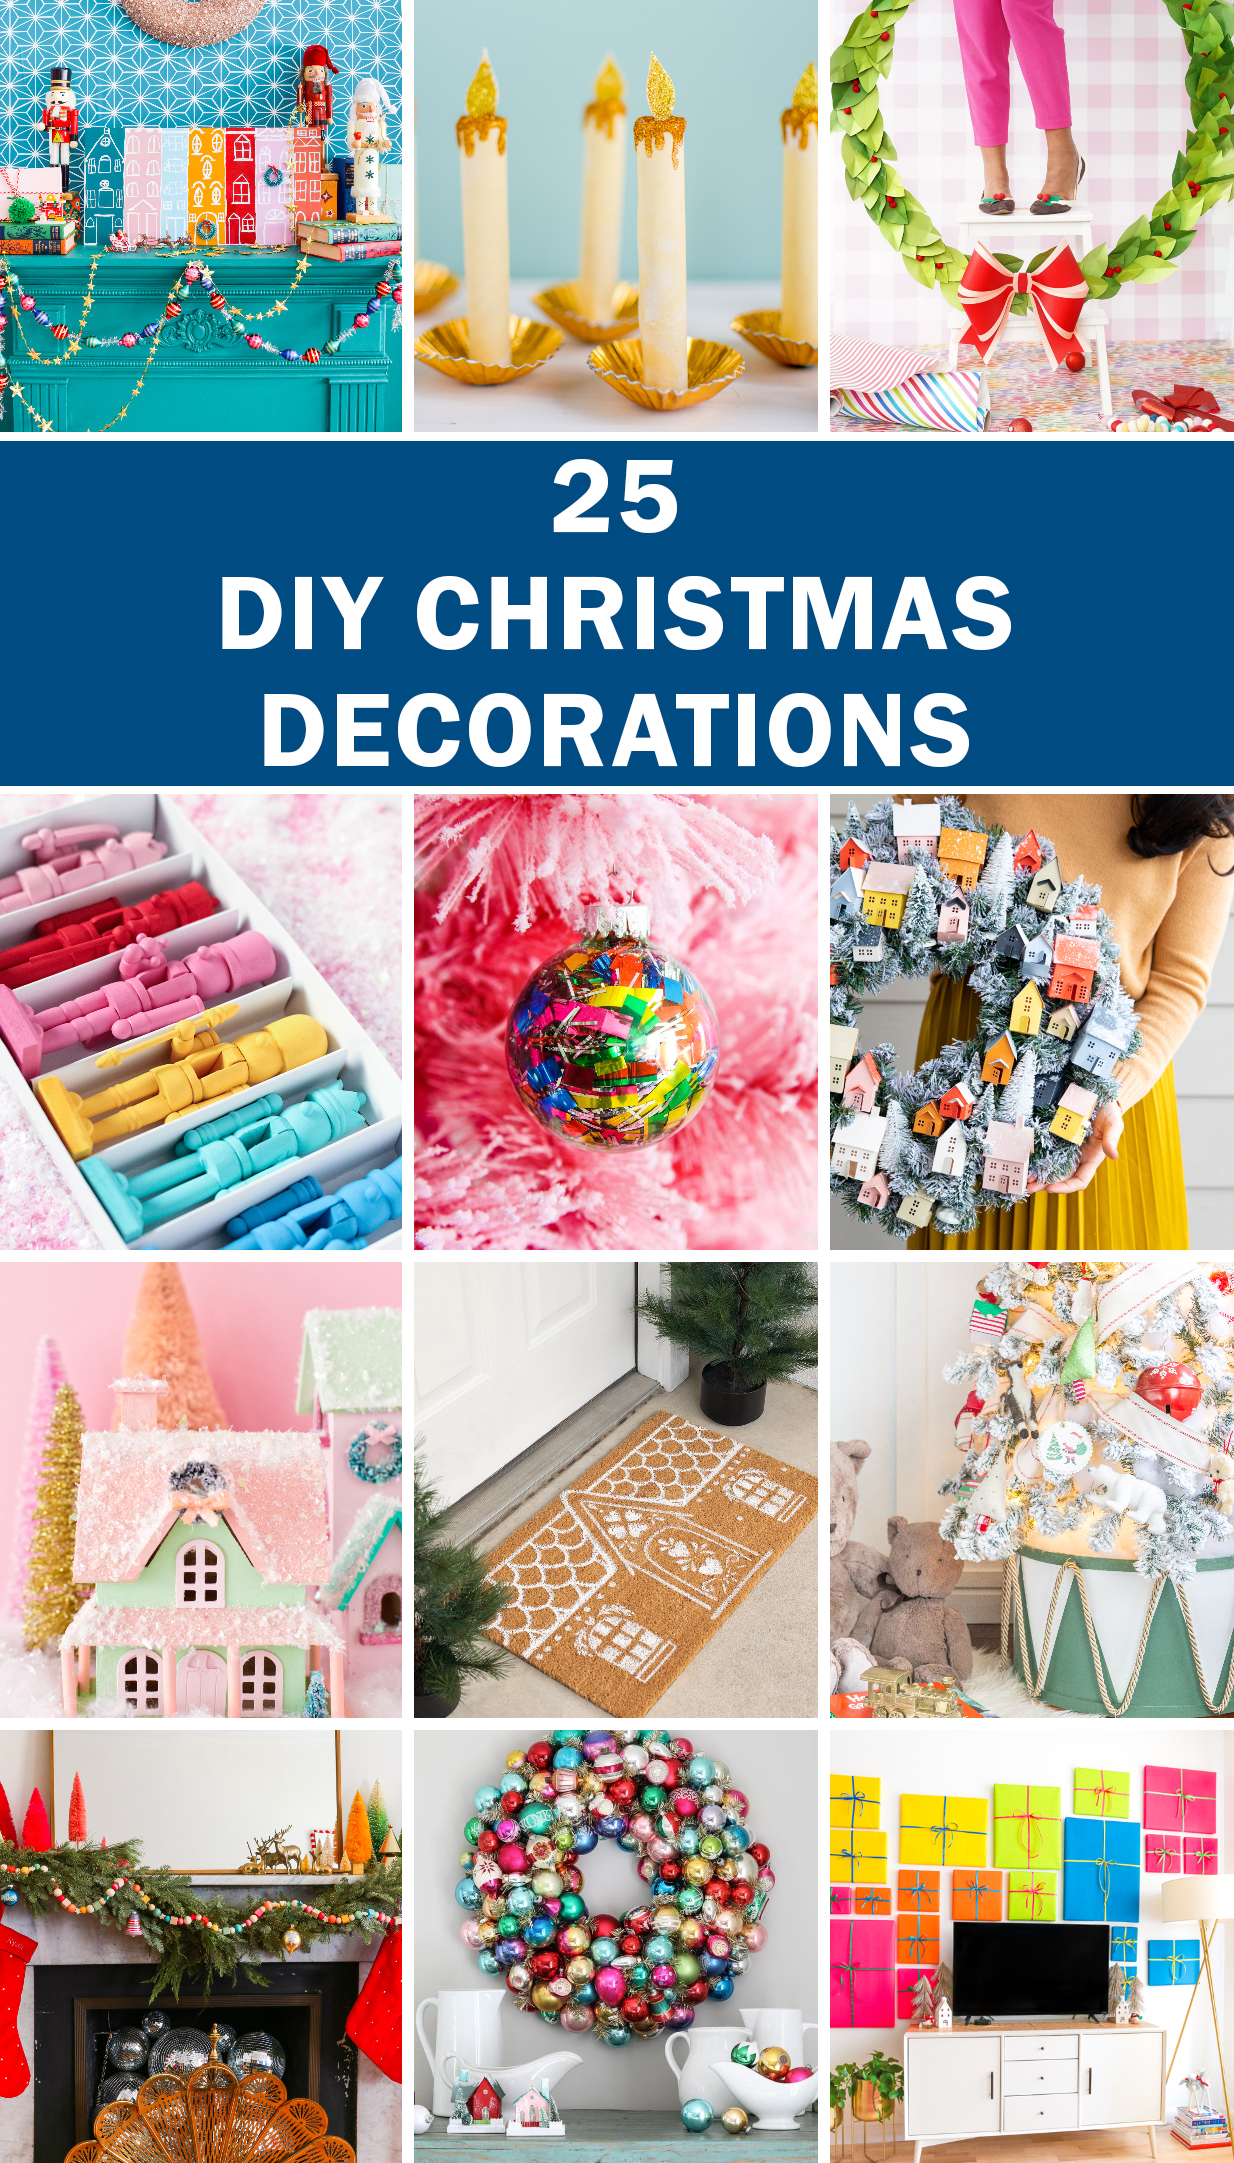 Make any of these 25 DIY Christmas Decorations for instant holiday joy! Every house needs handmade decor and this list is full of inspiration!